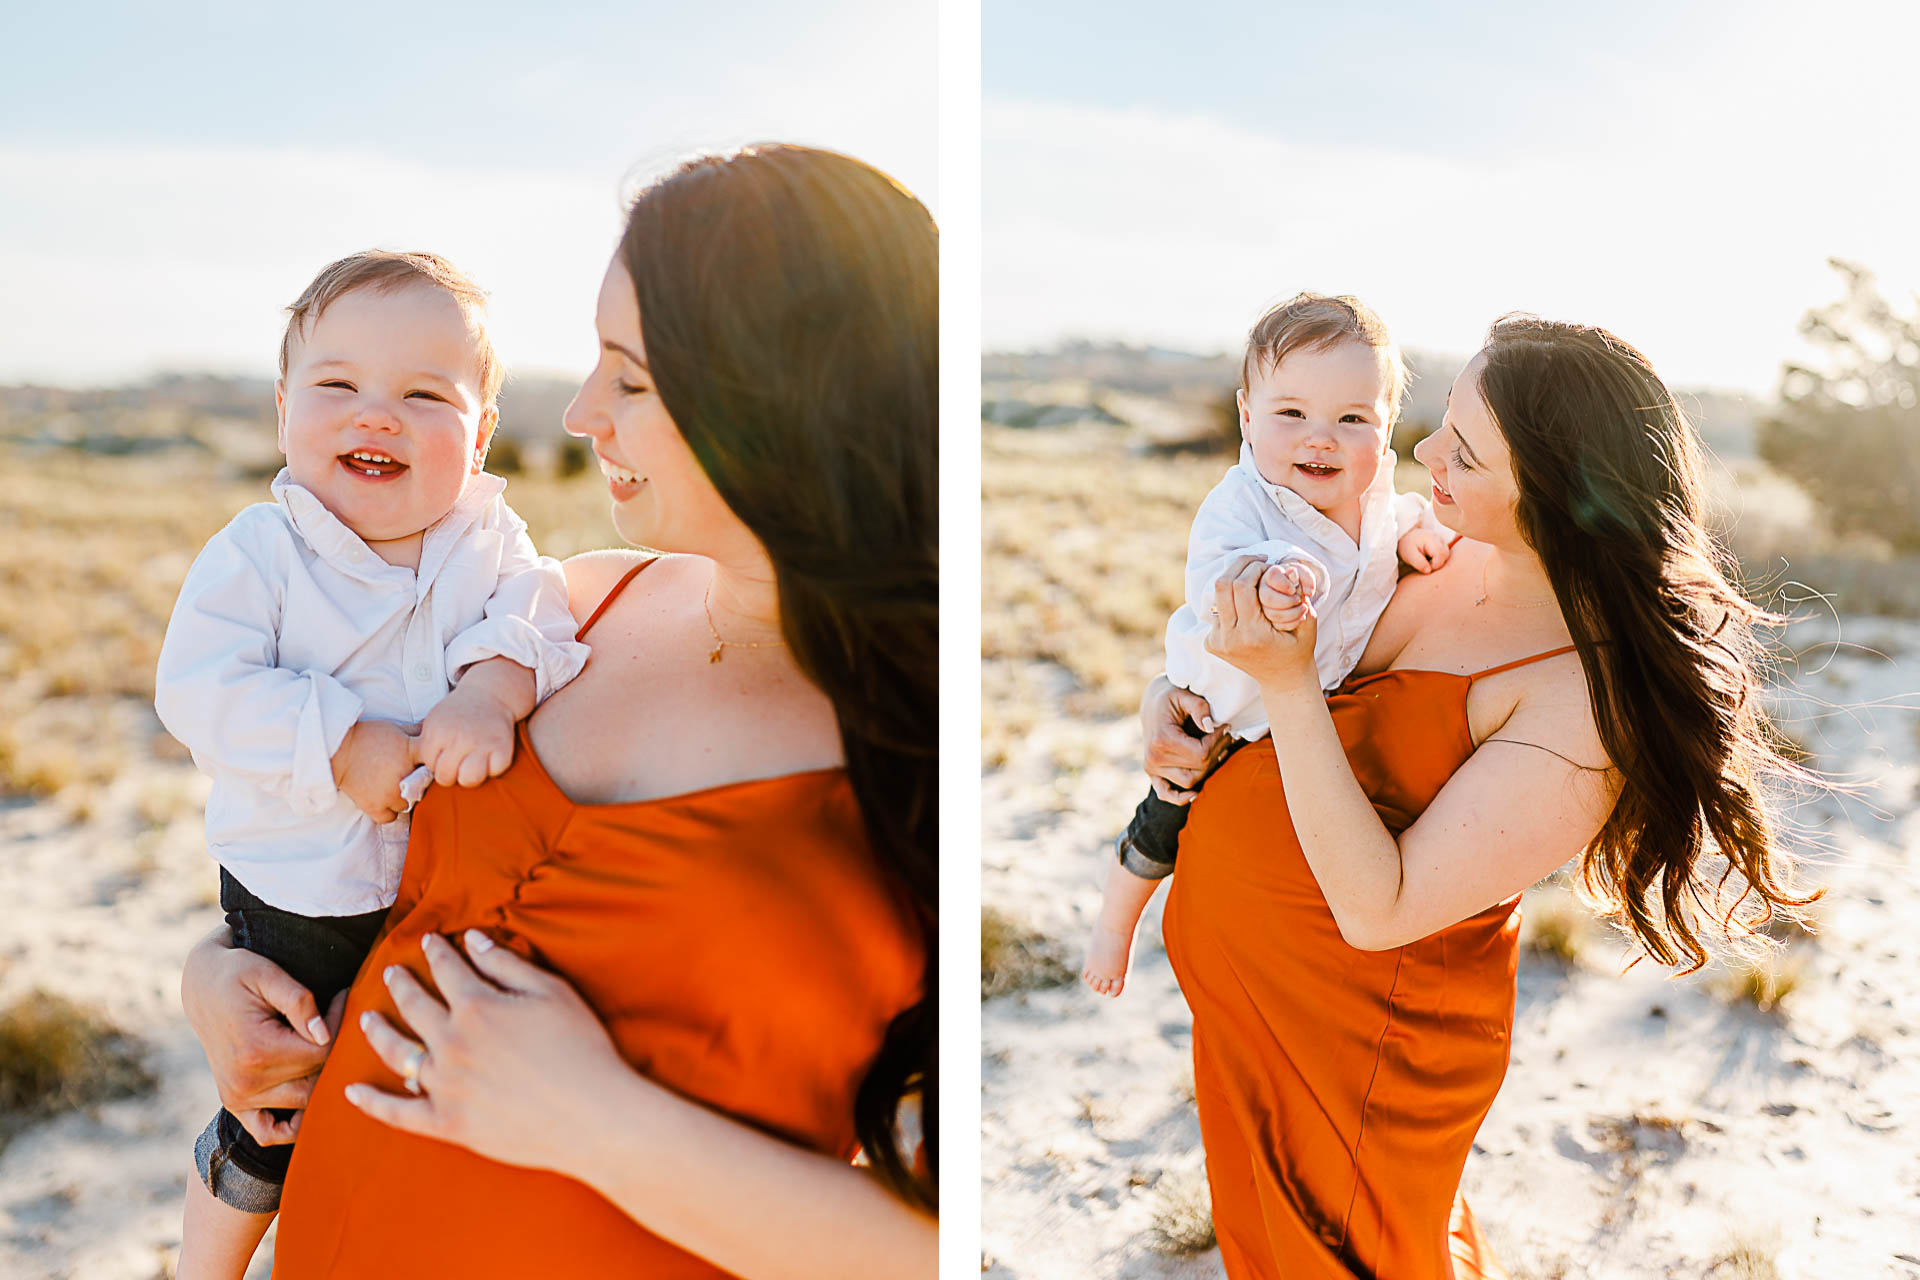 Photos by Norwell Family Photographer Christina Runnals | Family portraits on the beach